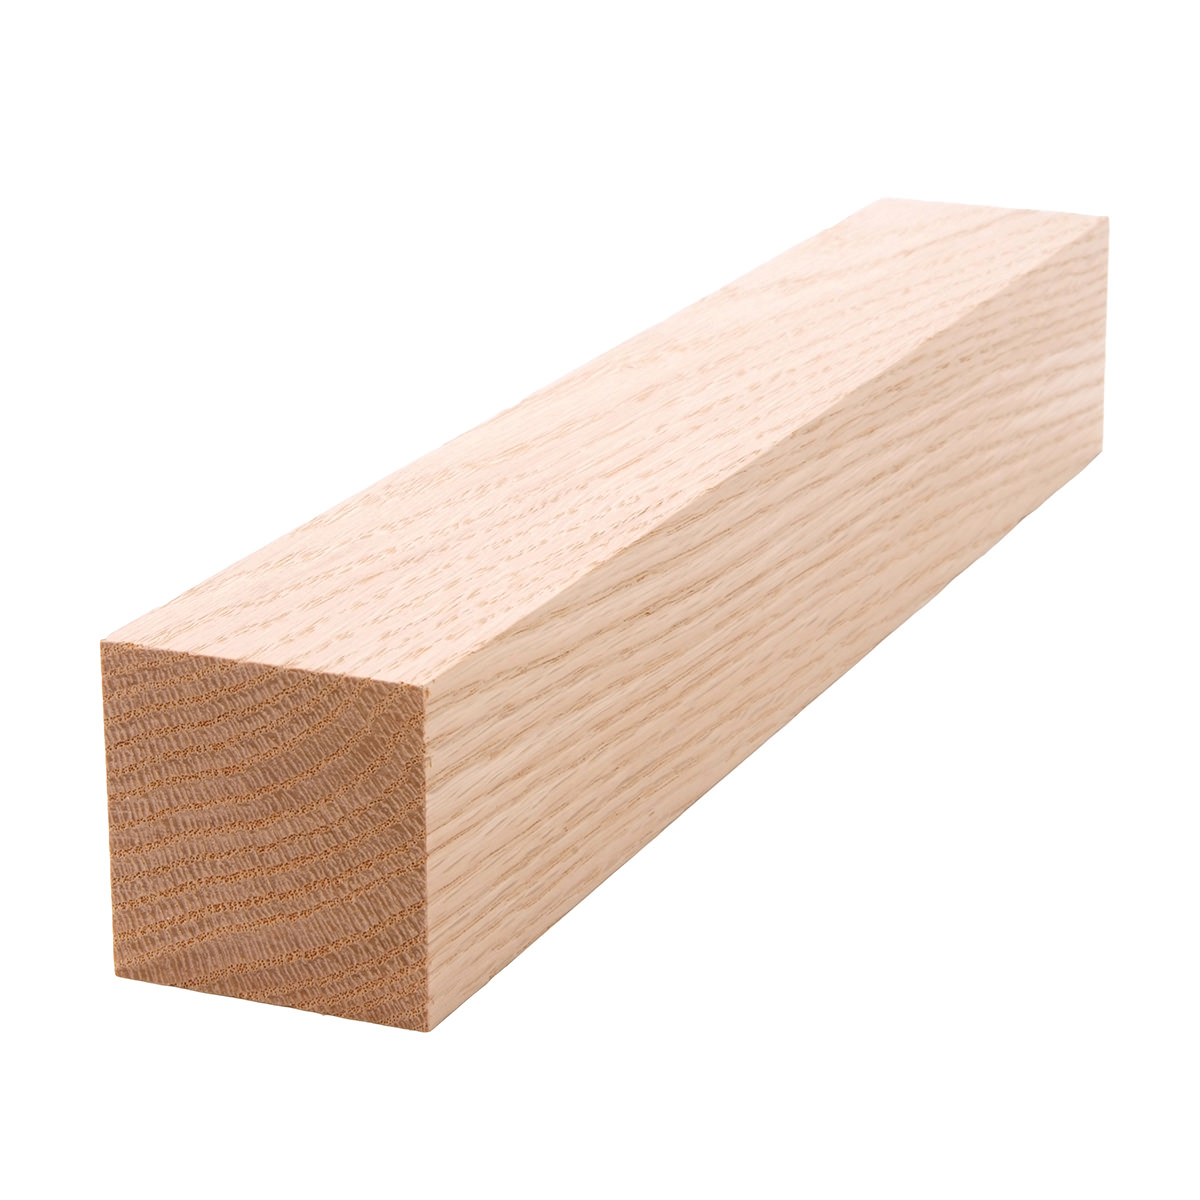 2x2 (13/4" x 13/4") Red Oak S4S Lumber & Square Stock from Baird Brothers